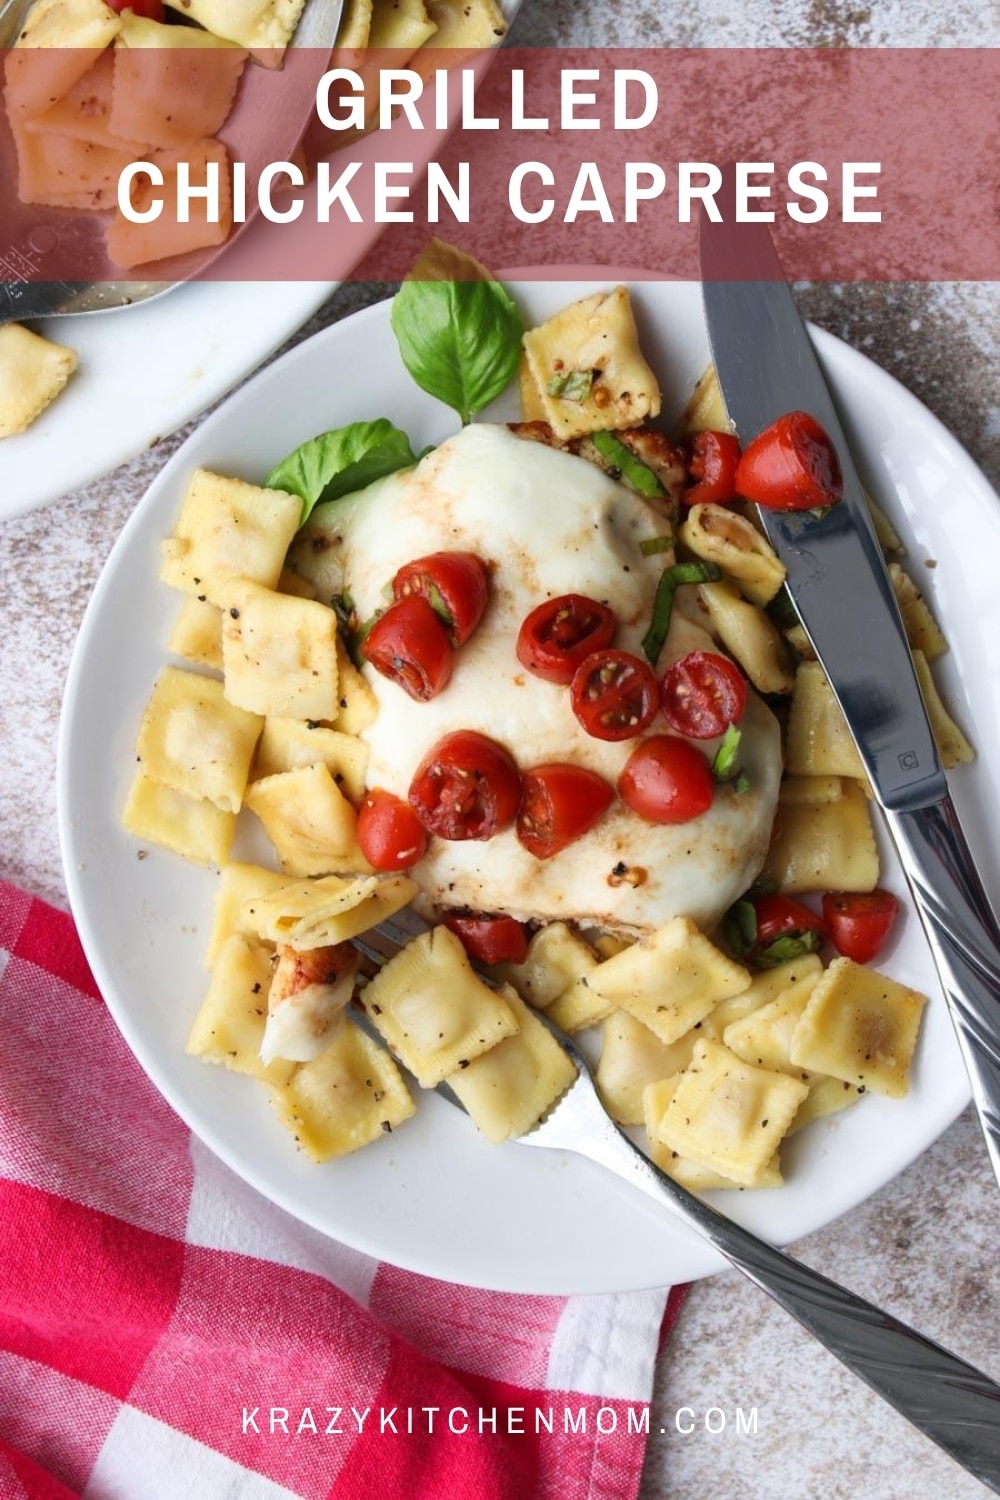 Fire up the grill for tender, juicy, flavor-packed grilled chicken topped with mozzarella cheese, fresh tomatoes, aromatic basil, olive oil, and balsamic vinegar.  via @krazykitchenmom